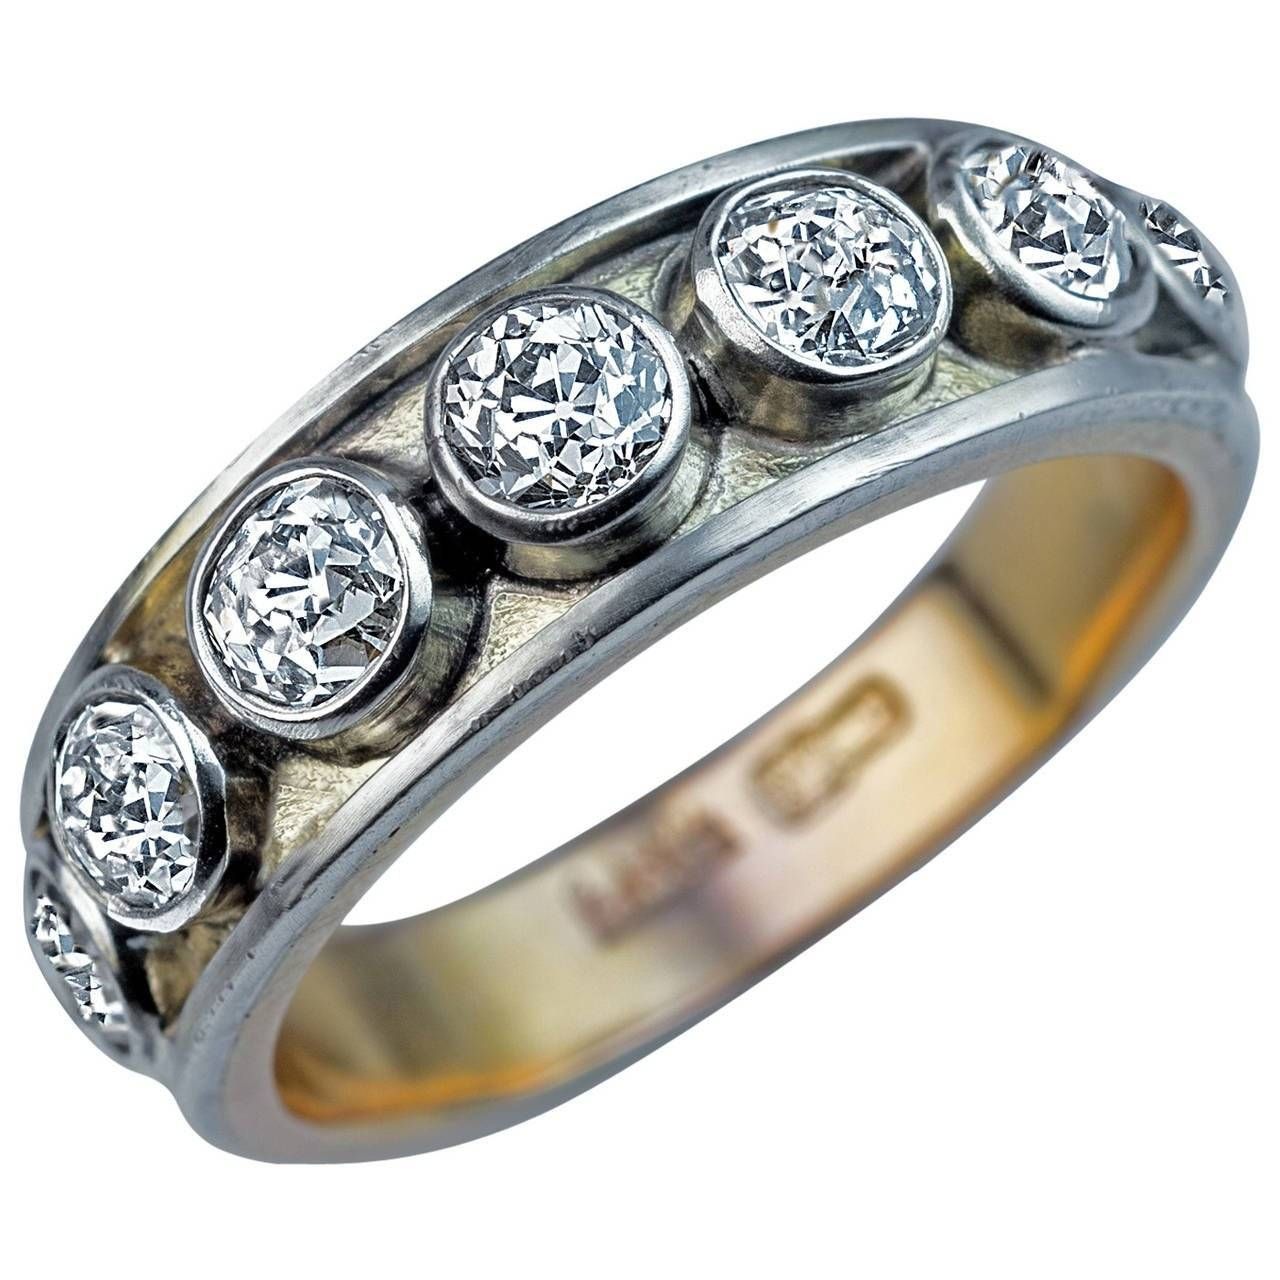 Antique Russian Men's Diamond Gold Band Ring For Sale At 1stdibs In Diamond Russian Wedding Rings (View 11 of 15)